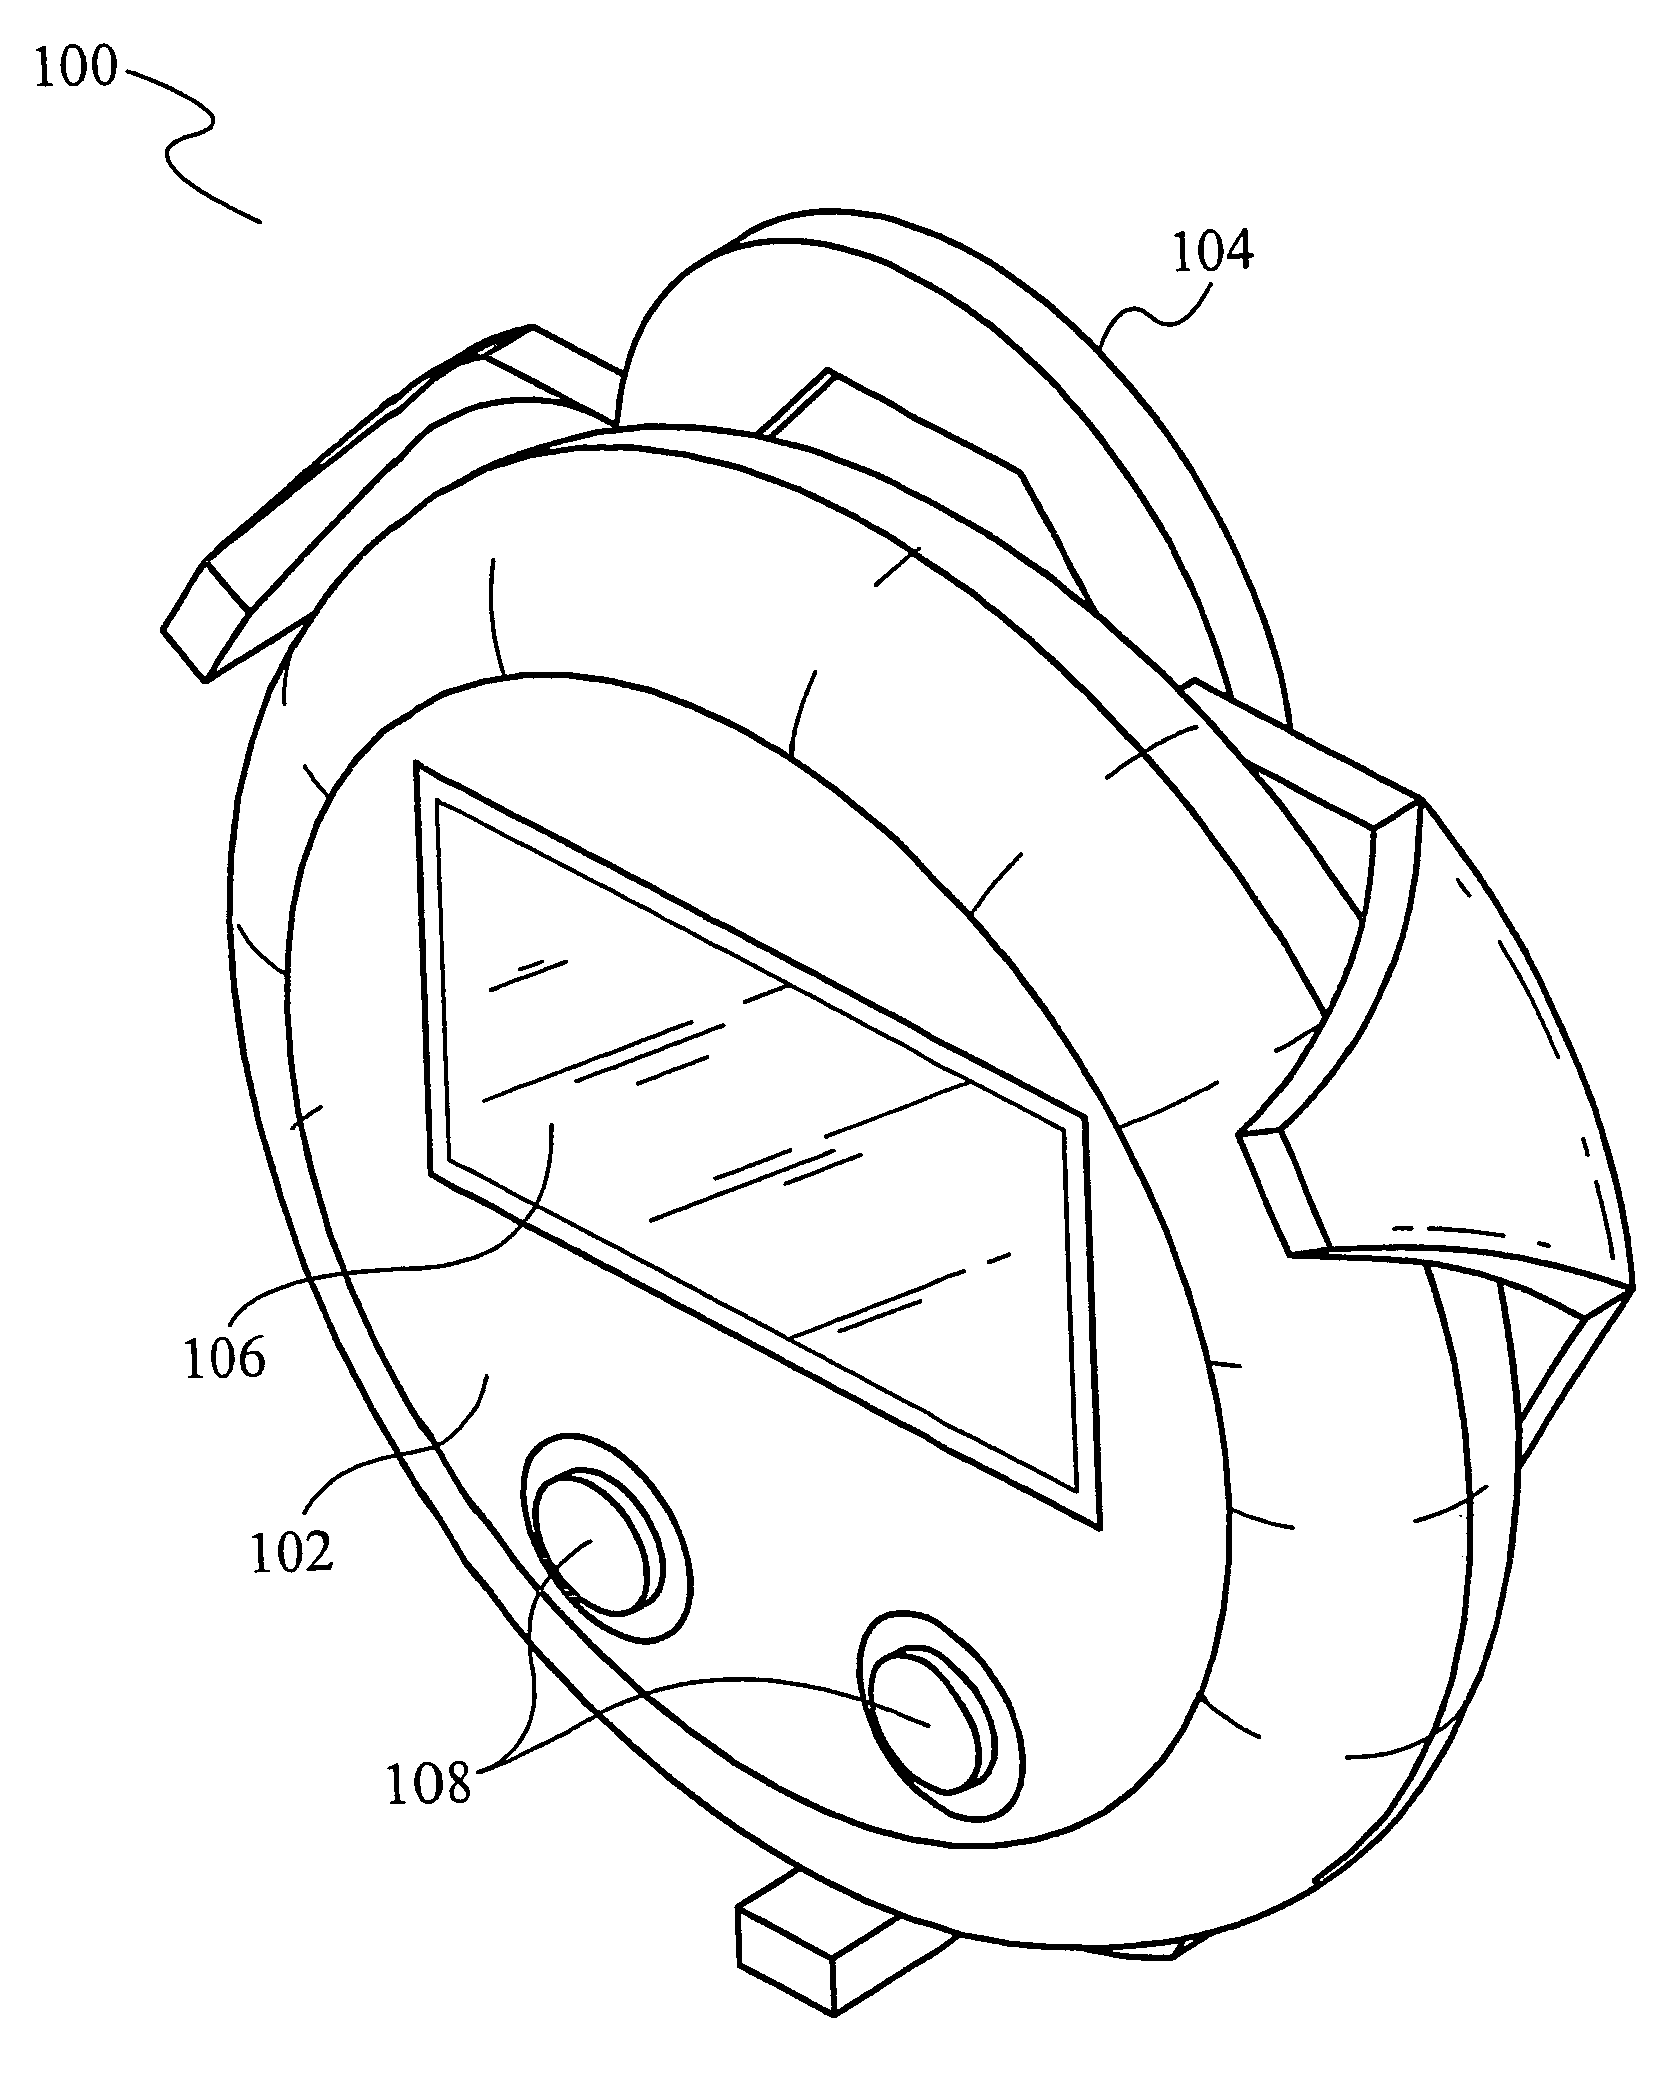 Electronic pace regulating, timing, and coaching device and system